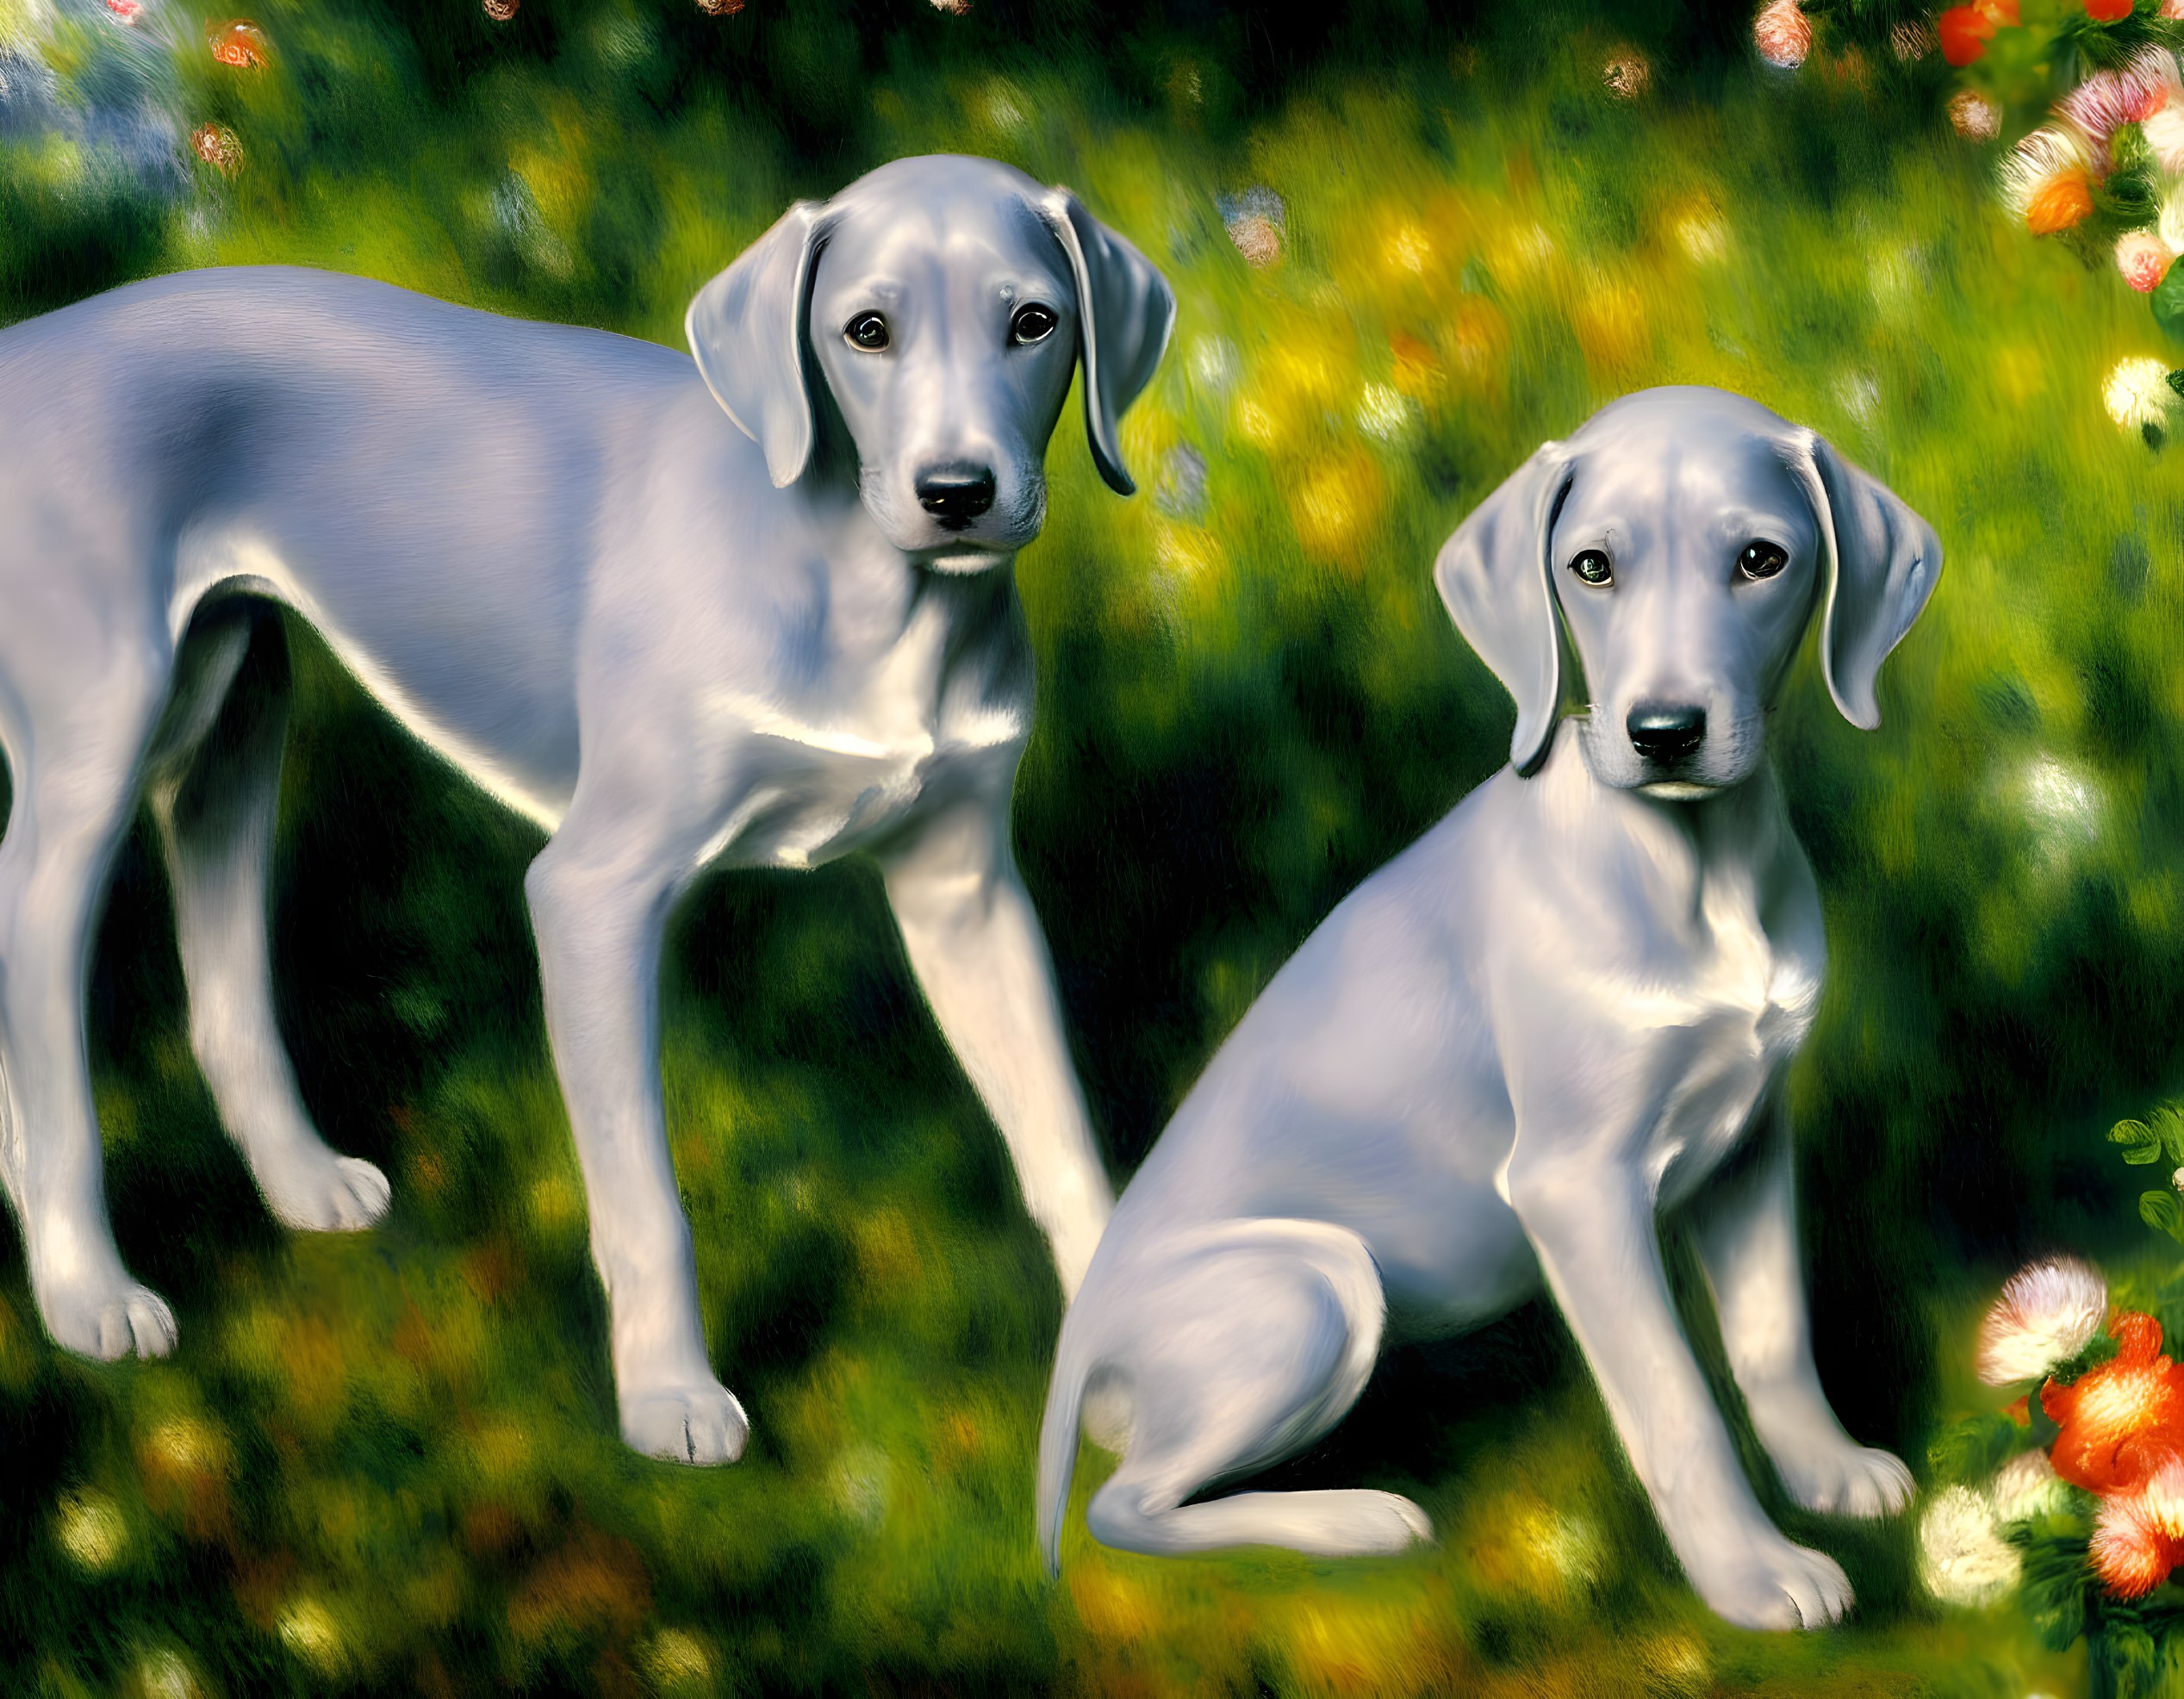 Two White Dogs in Vibrant Garden with Greenery and Flowers